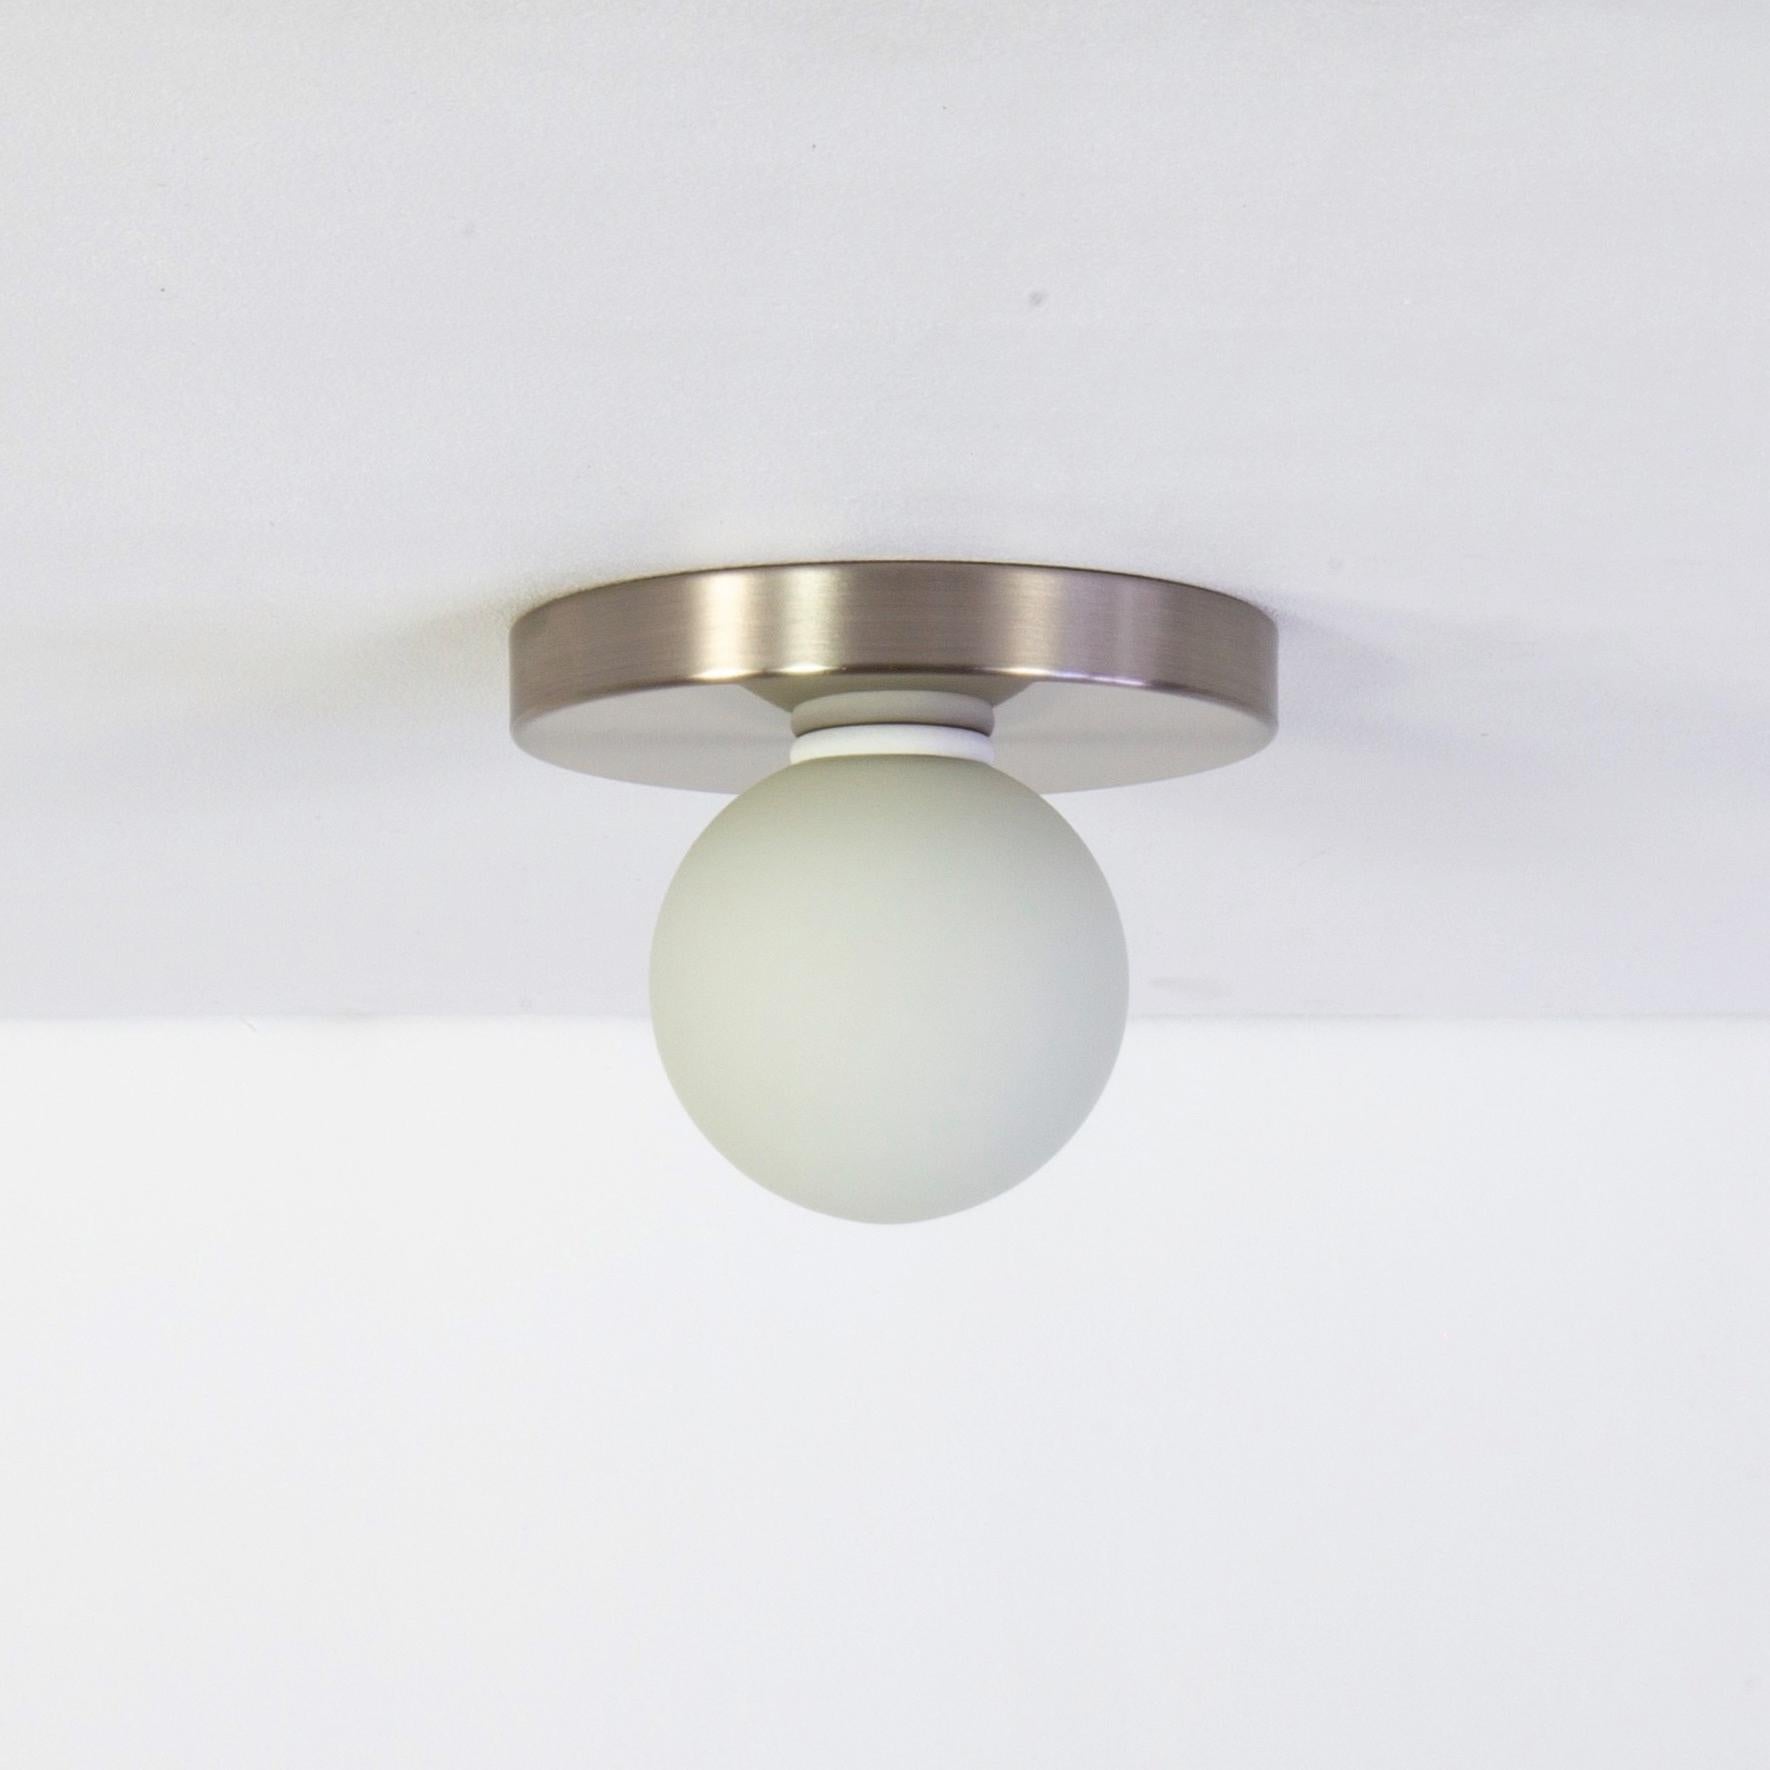 This listing is for 1x Globe Flush Mount in brushed nickel designed and manufactured by Research.Lighting.

Materials: Brass, Steel & Glass
Finish: Brushed Nickel
Electronics: 1x G9 Socket, 1x 4.5 Watt LED Bulb (included), 450 Lumens
ADA Compliant.